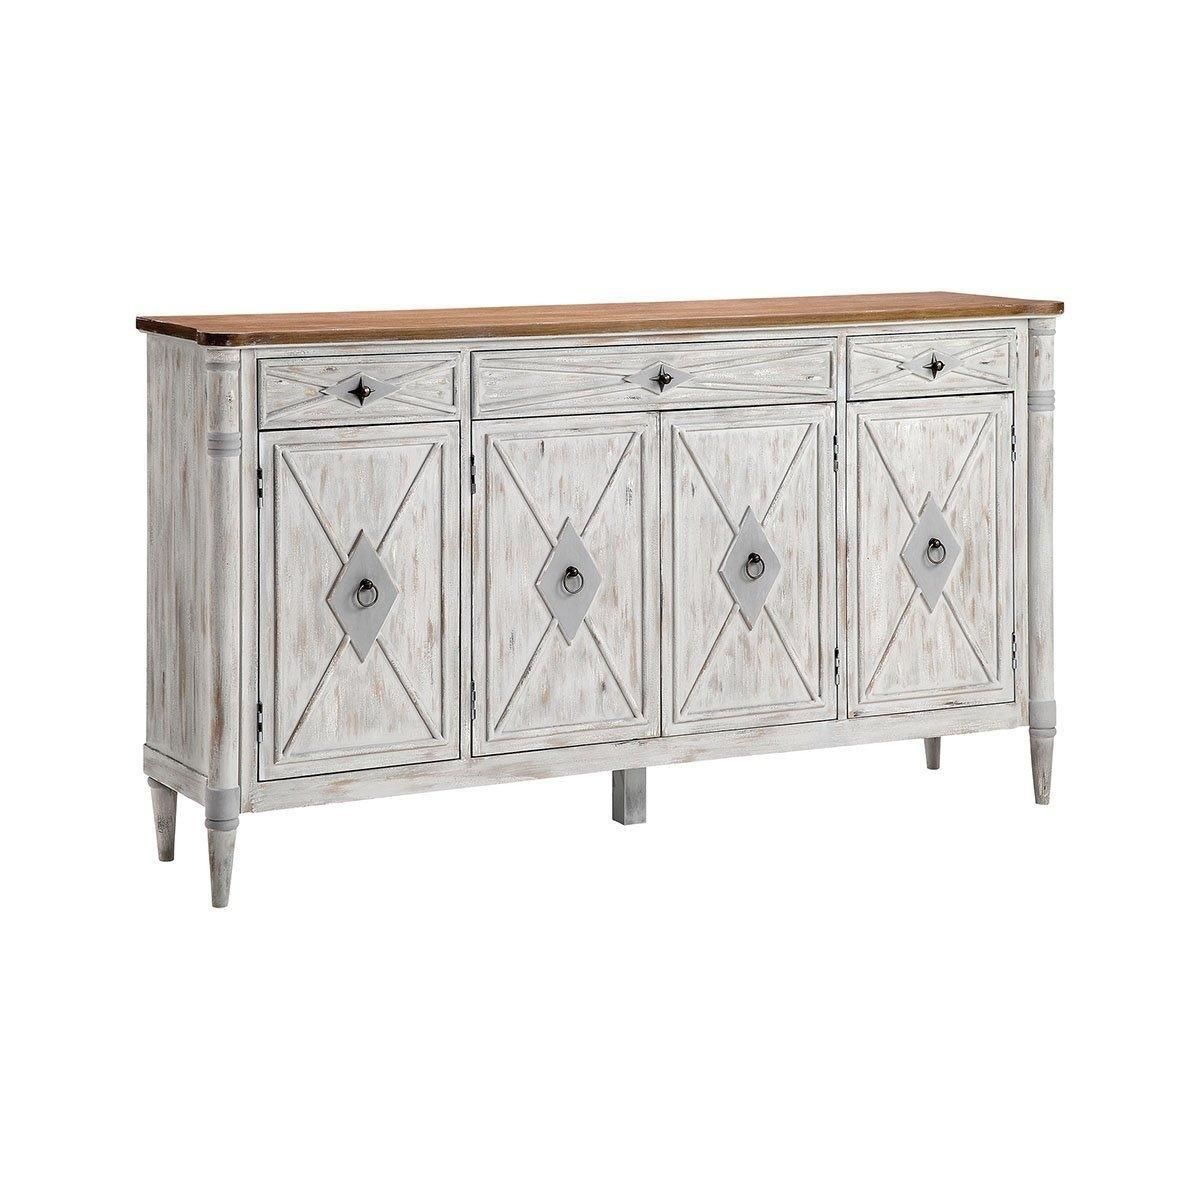 Graves Cabinet Stein World 13692 | Products | Cabinet Throughout Hayter Sideboards (View 9 of 30)